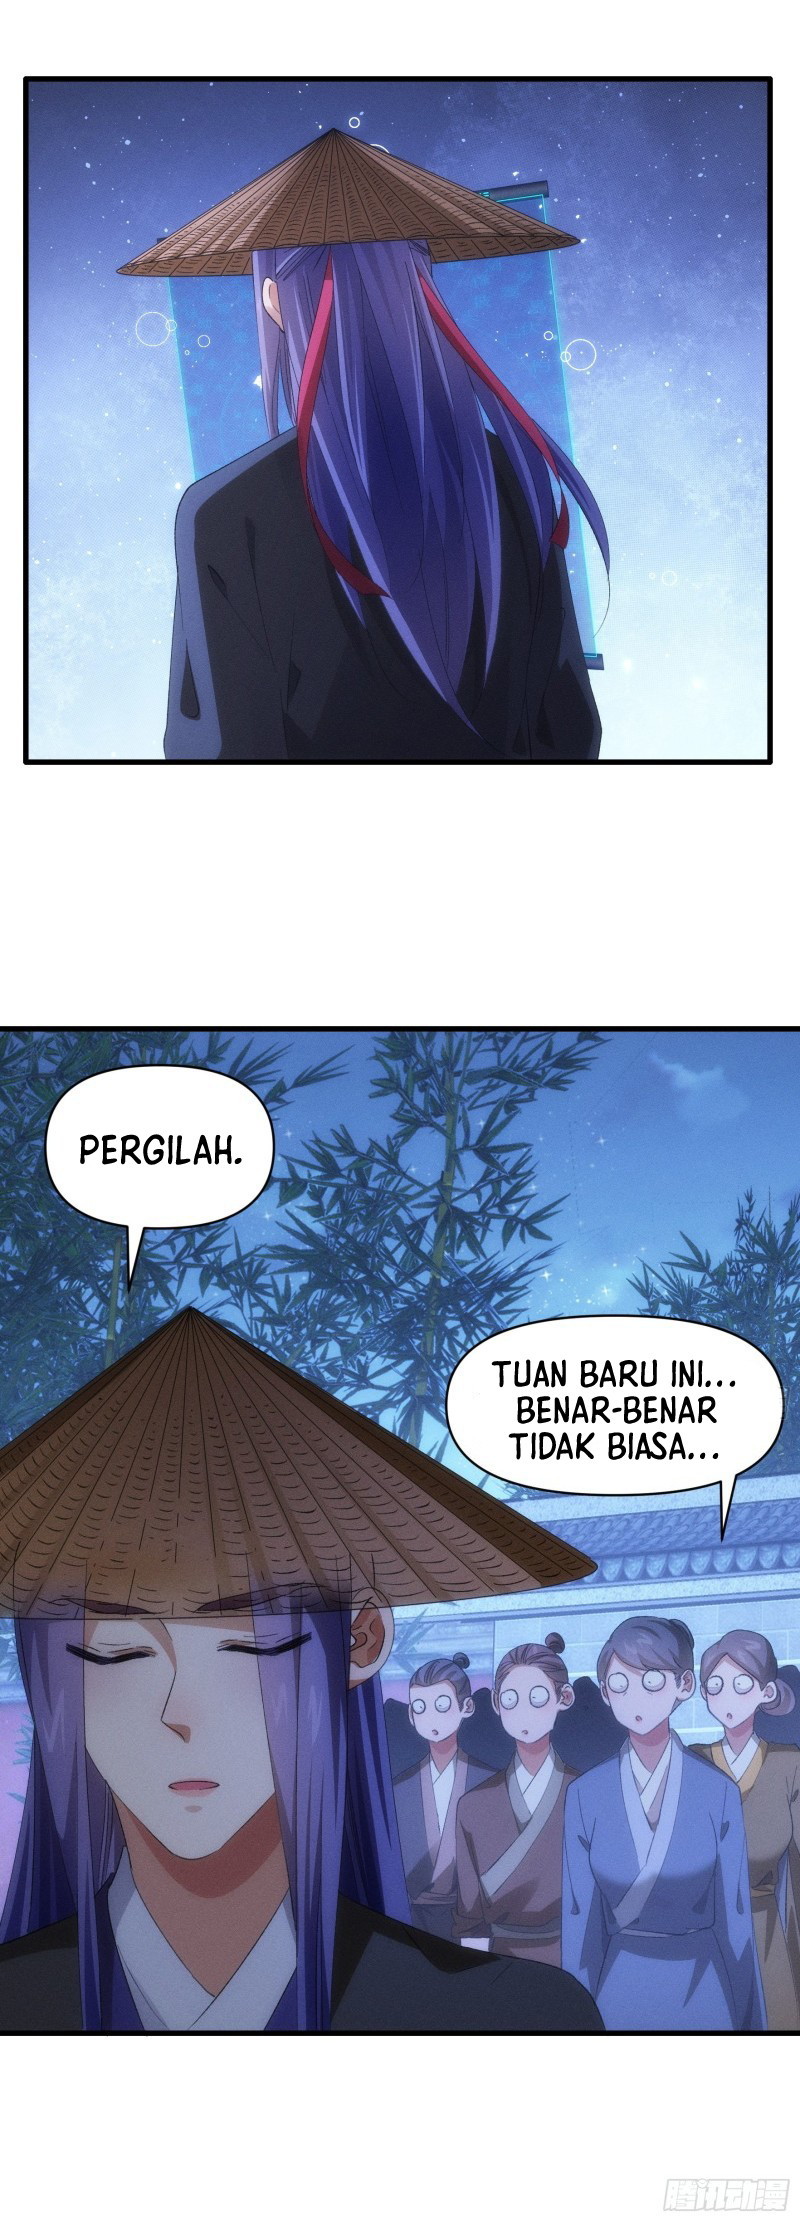 Dilarang COPAS - situs resmi www.mangacanblog.com - Komik i just dont play the card according to the routine 056 - chapter 56 57 Indonesia i just dont play the card according to the routine 056 - chapter 56 Terbaru 24|Baca Manga Komik Indonesia|Mangacan